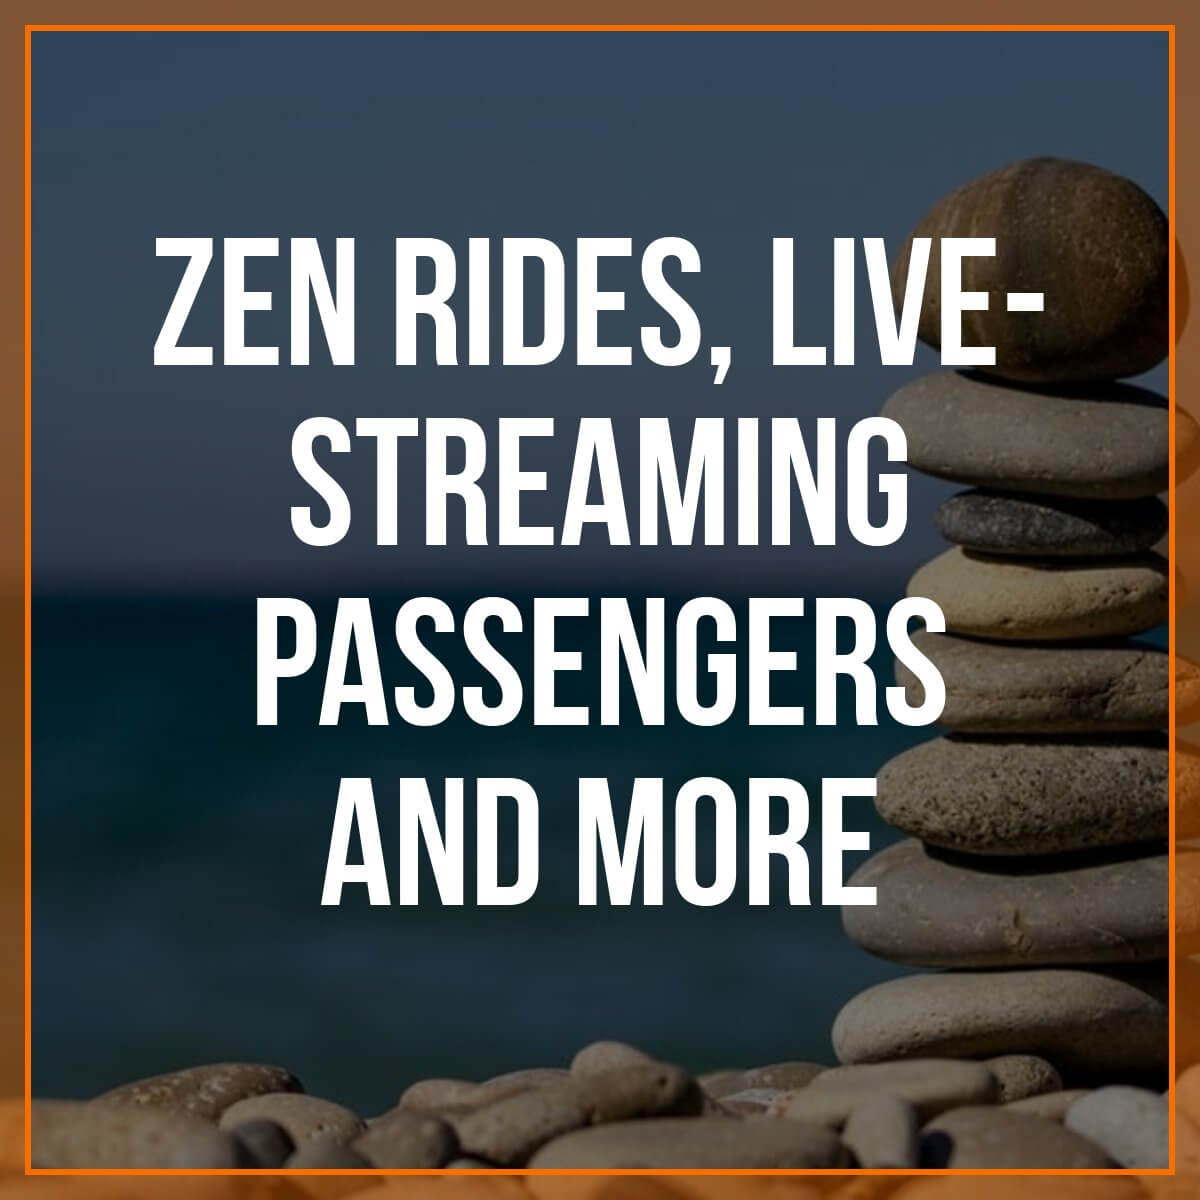 Lots to cover in this week’s round up, including zen rides for passengers (and drivers!), autonomous vehicles on the rise, plus Caviar’s new instant pay for couriers. Senior RSG contributor John Ince covers all of these stories, plus potential new tax revenue for cities, in this week’s round up.